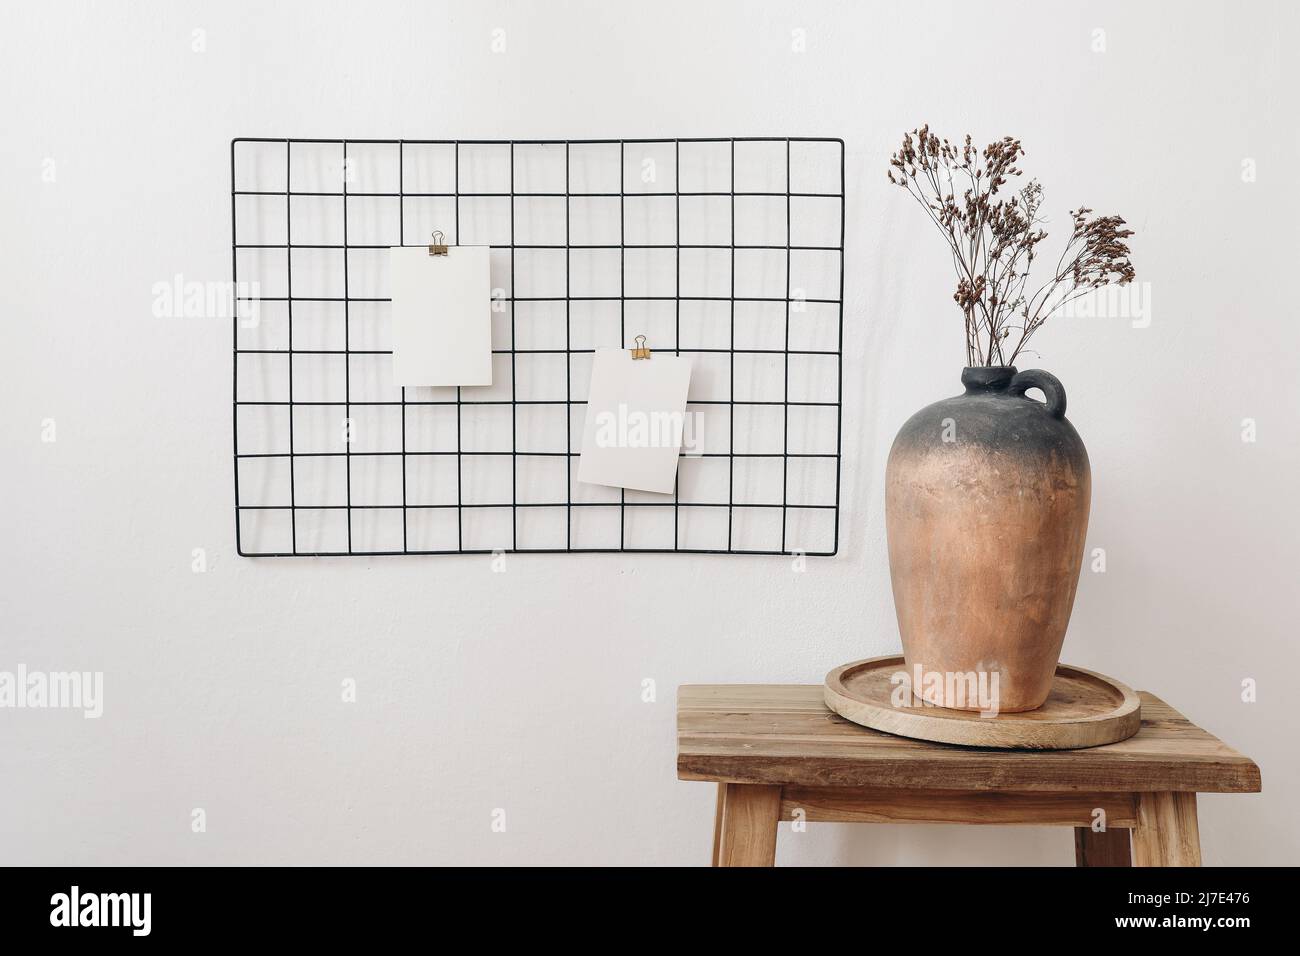 Rustic clay vase with dry hypericum bouquet on wooden table. Black metal mesh noticeboard, bulletin board with blank memo cards mockups. Elegant home Stock Photo